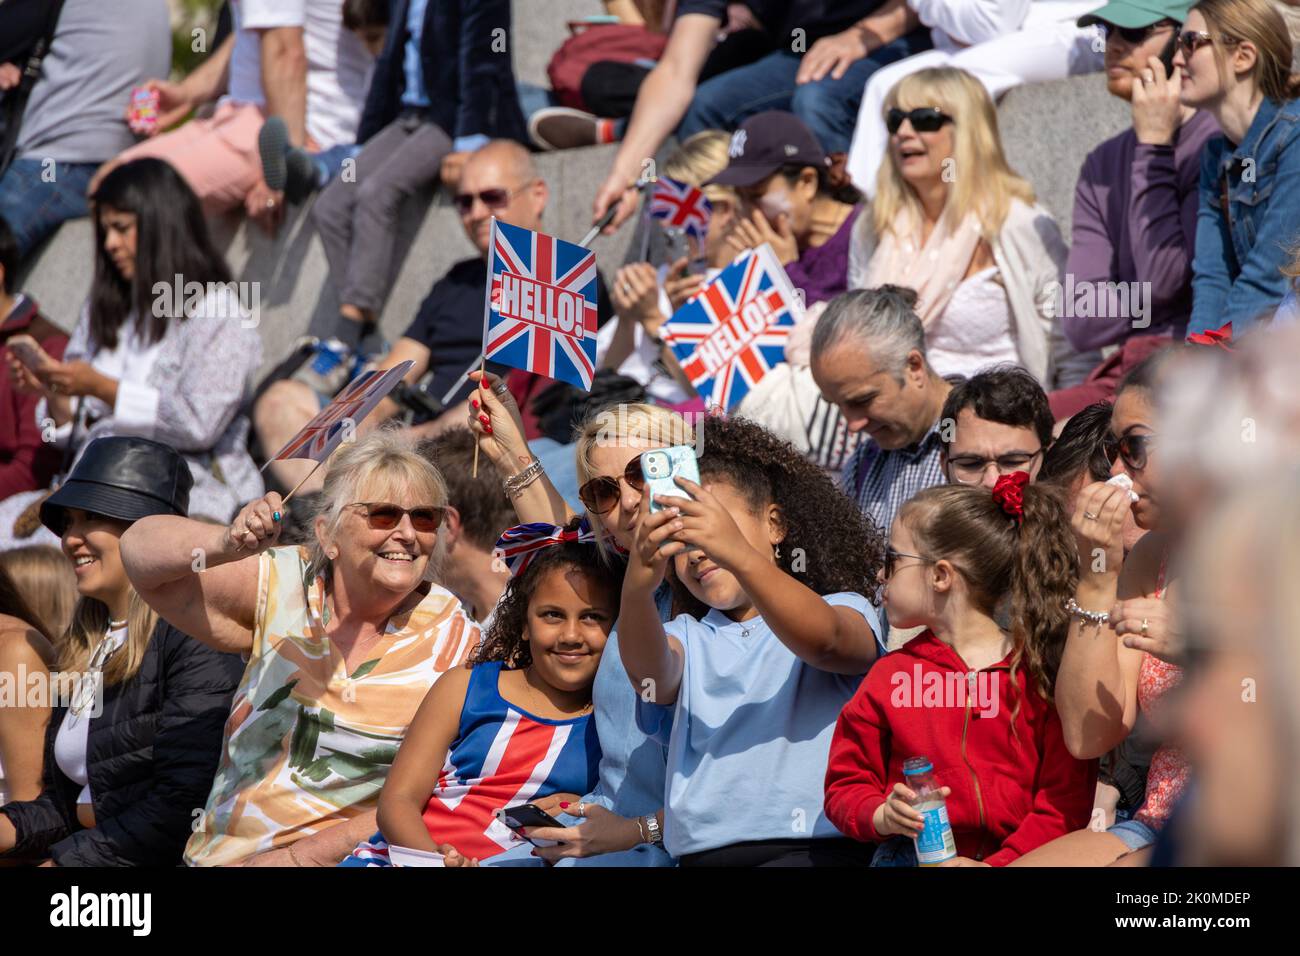 Group of people taking a selfie in the UK with Union Jack flags during the Platinum Jubilee in June 2022 Stock Photo